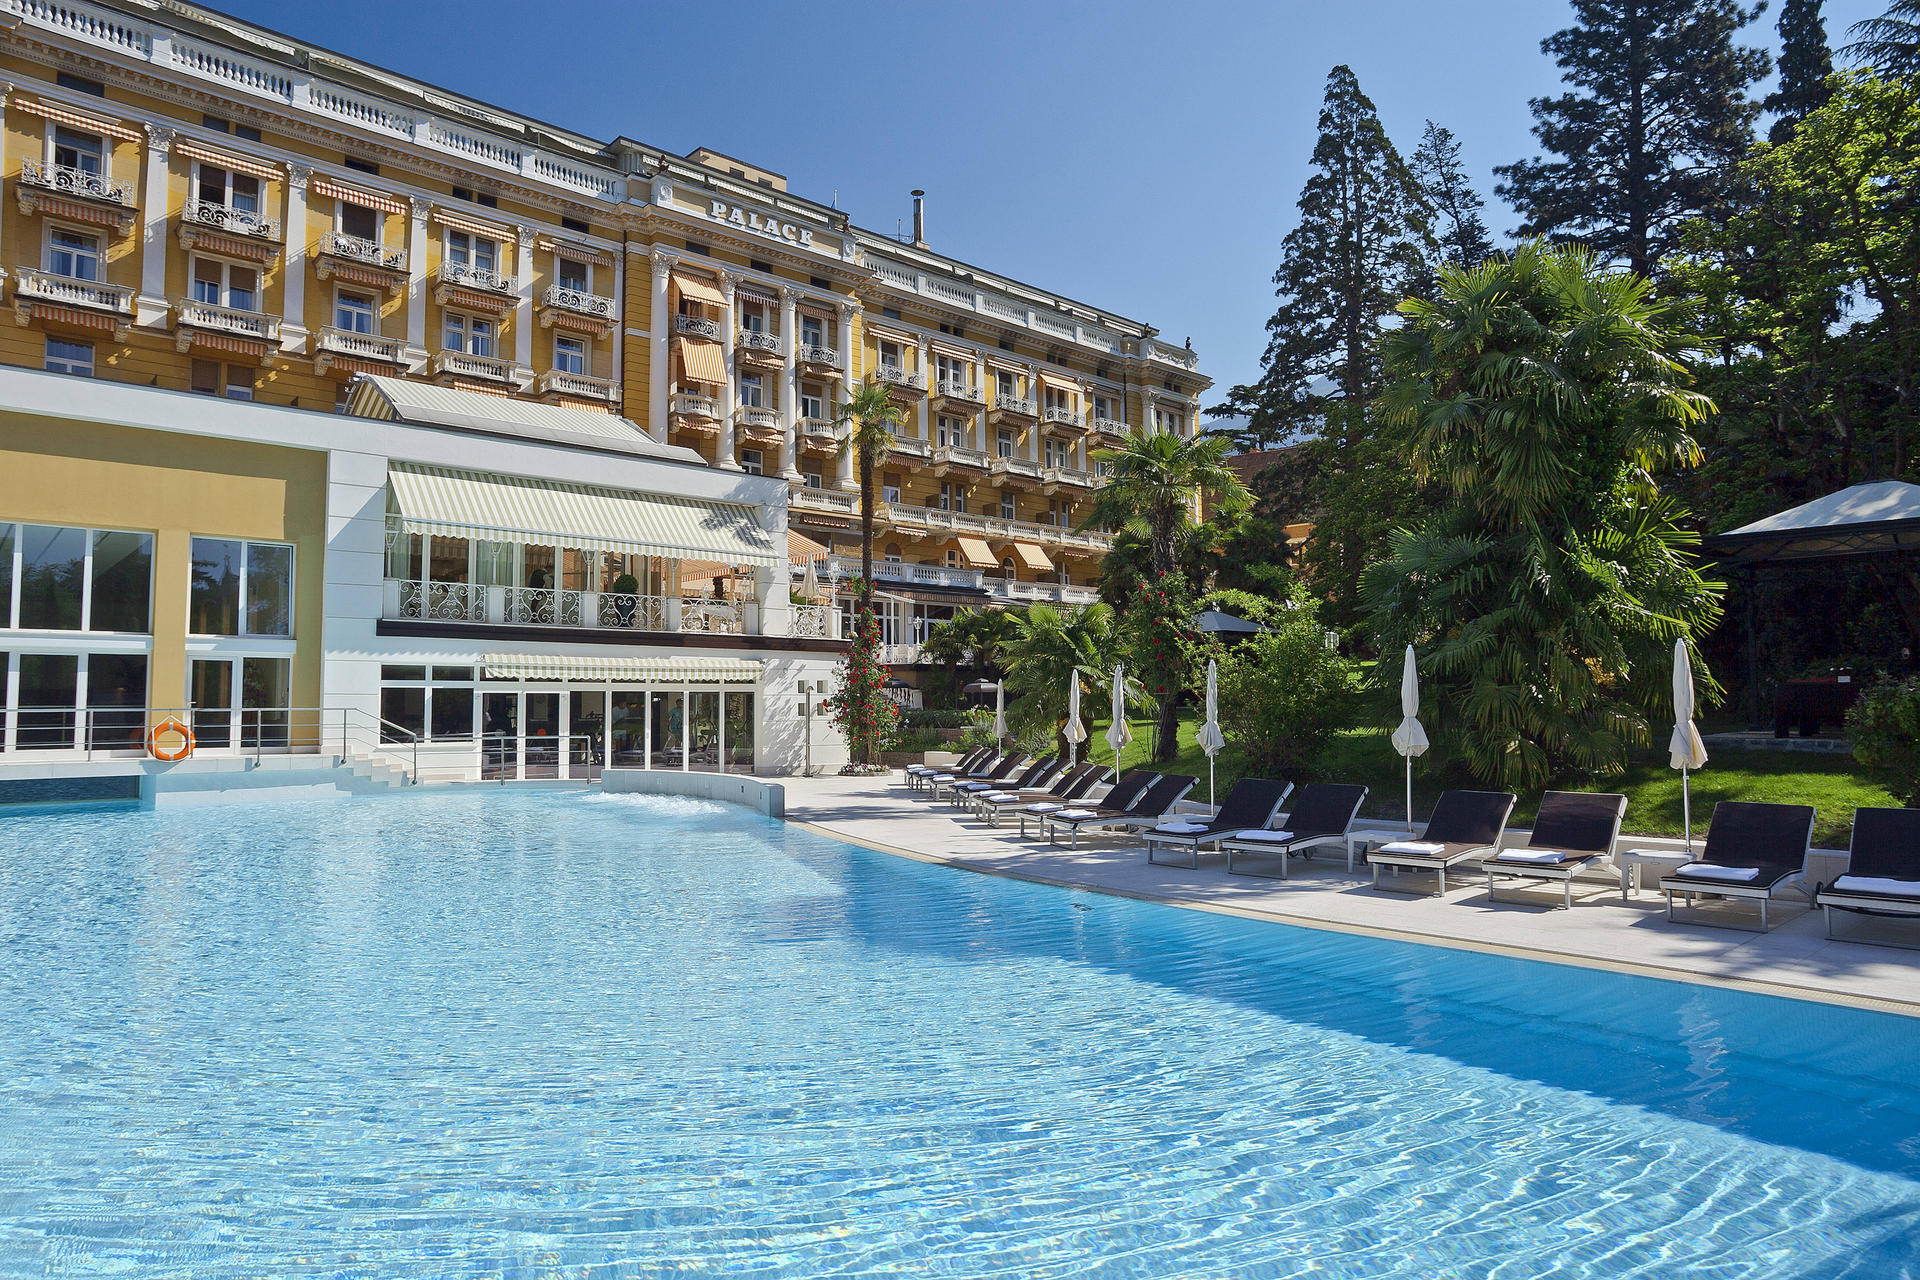 Italy's Palace Merano hotel features a huge swimming pool for guests to enjoy.